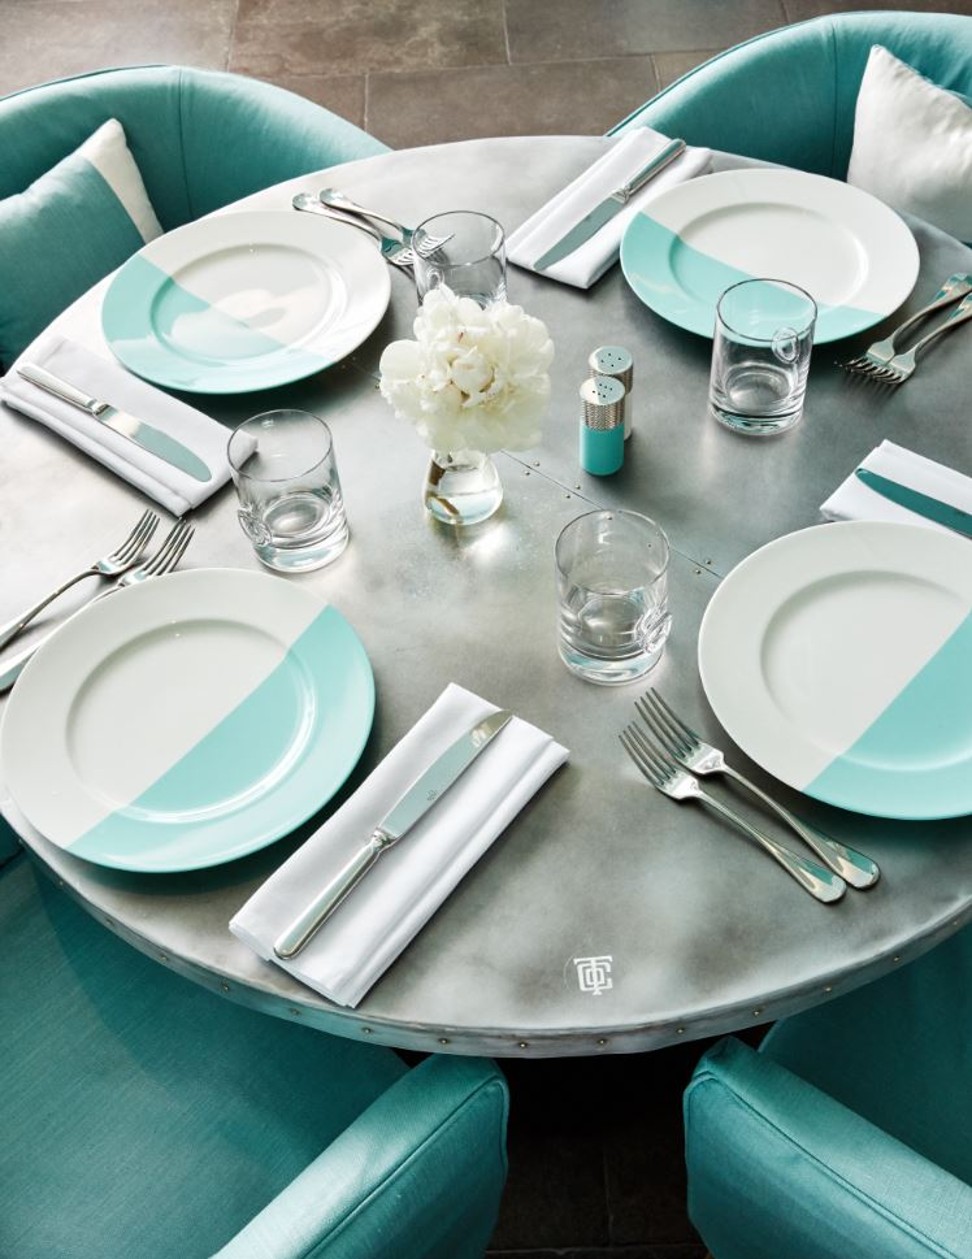 Silverware and flatware adorn the beautiful table settings at Tiffany Blue Box Cafe.